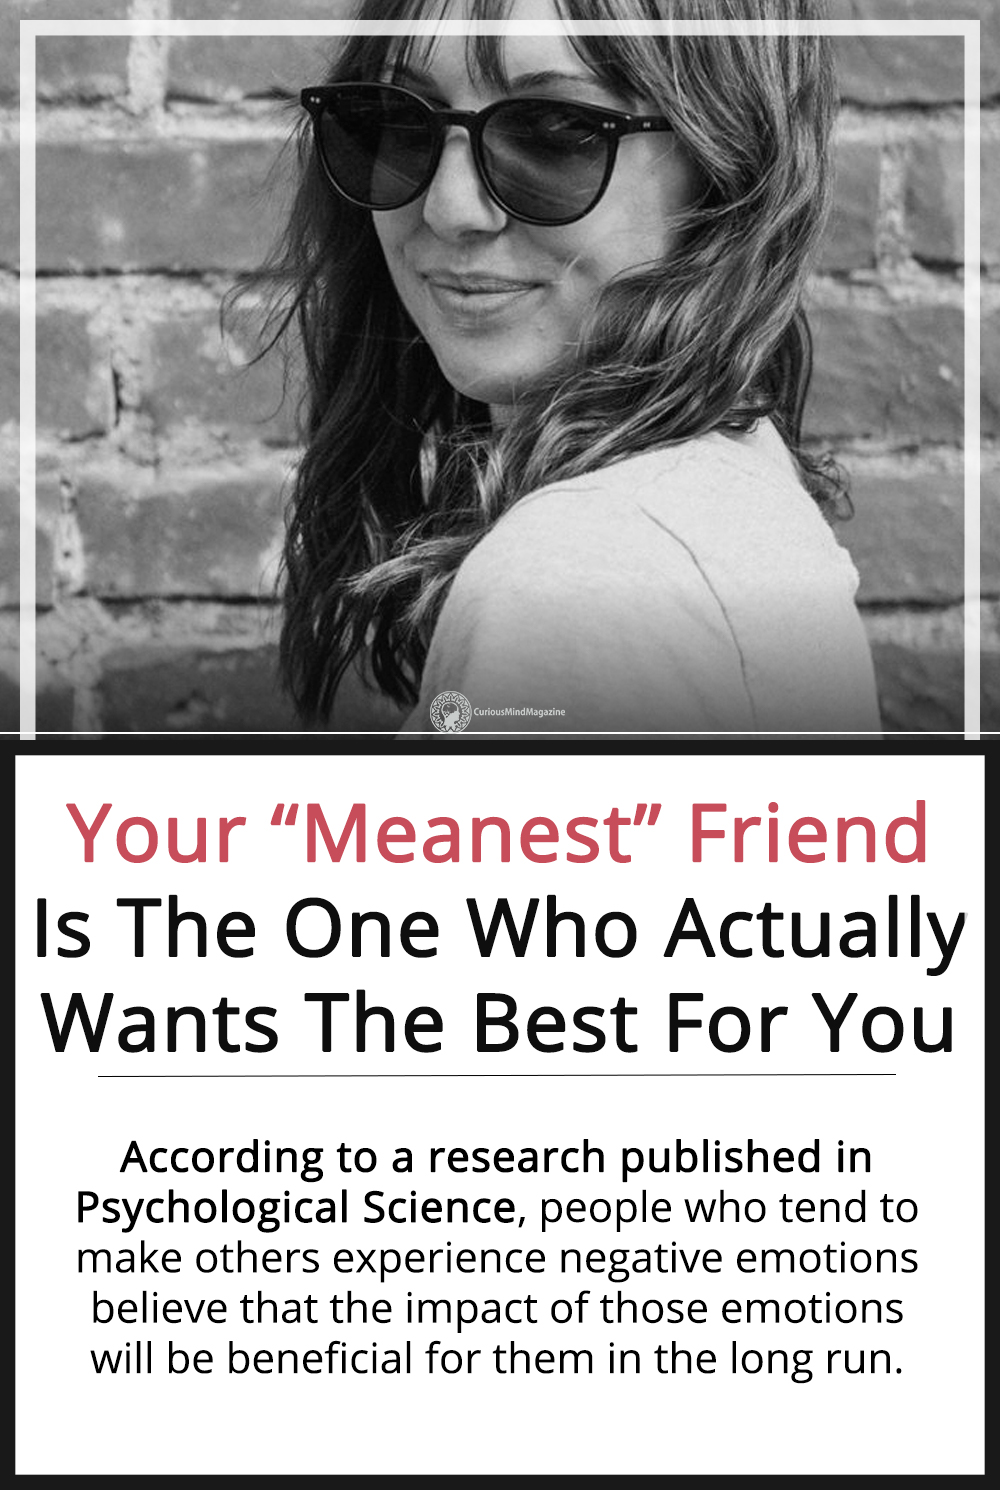 Your “Meanest” Friend Is The One Who Actually Wants The Best For You